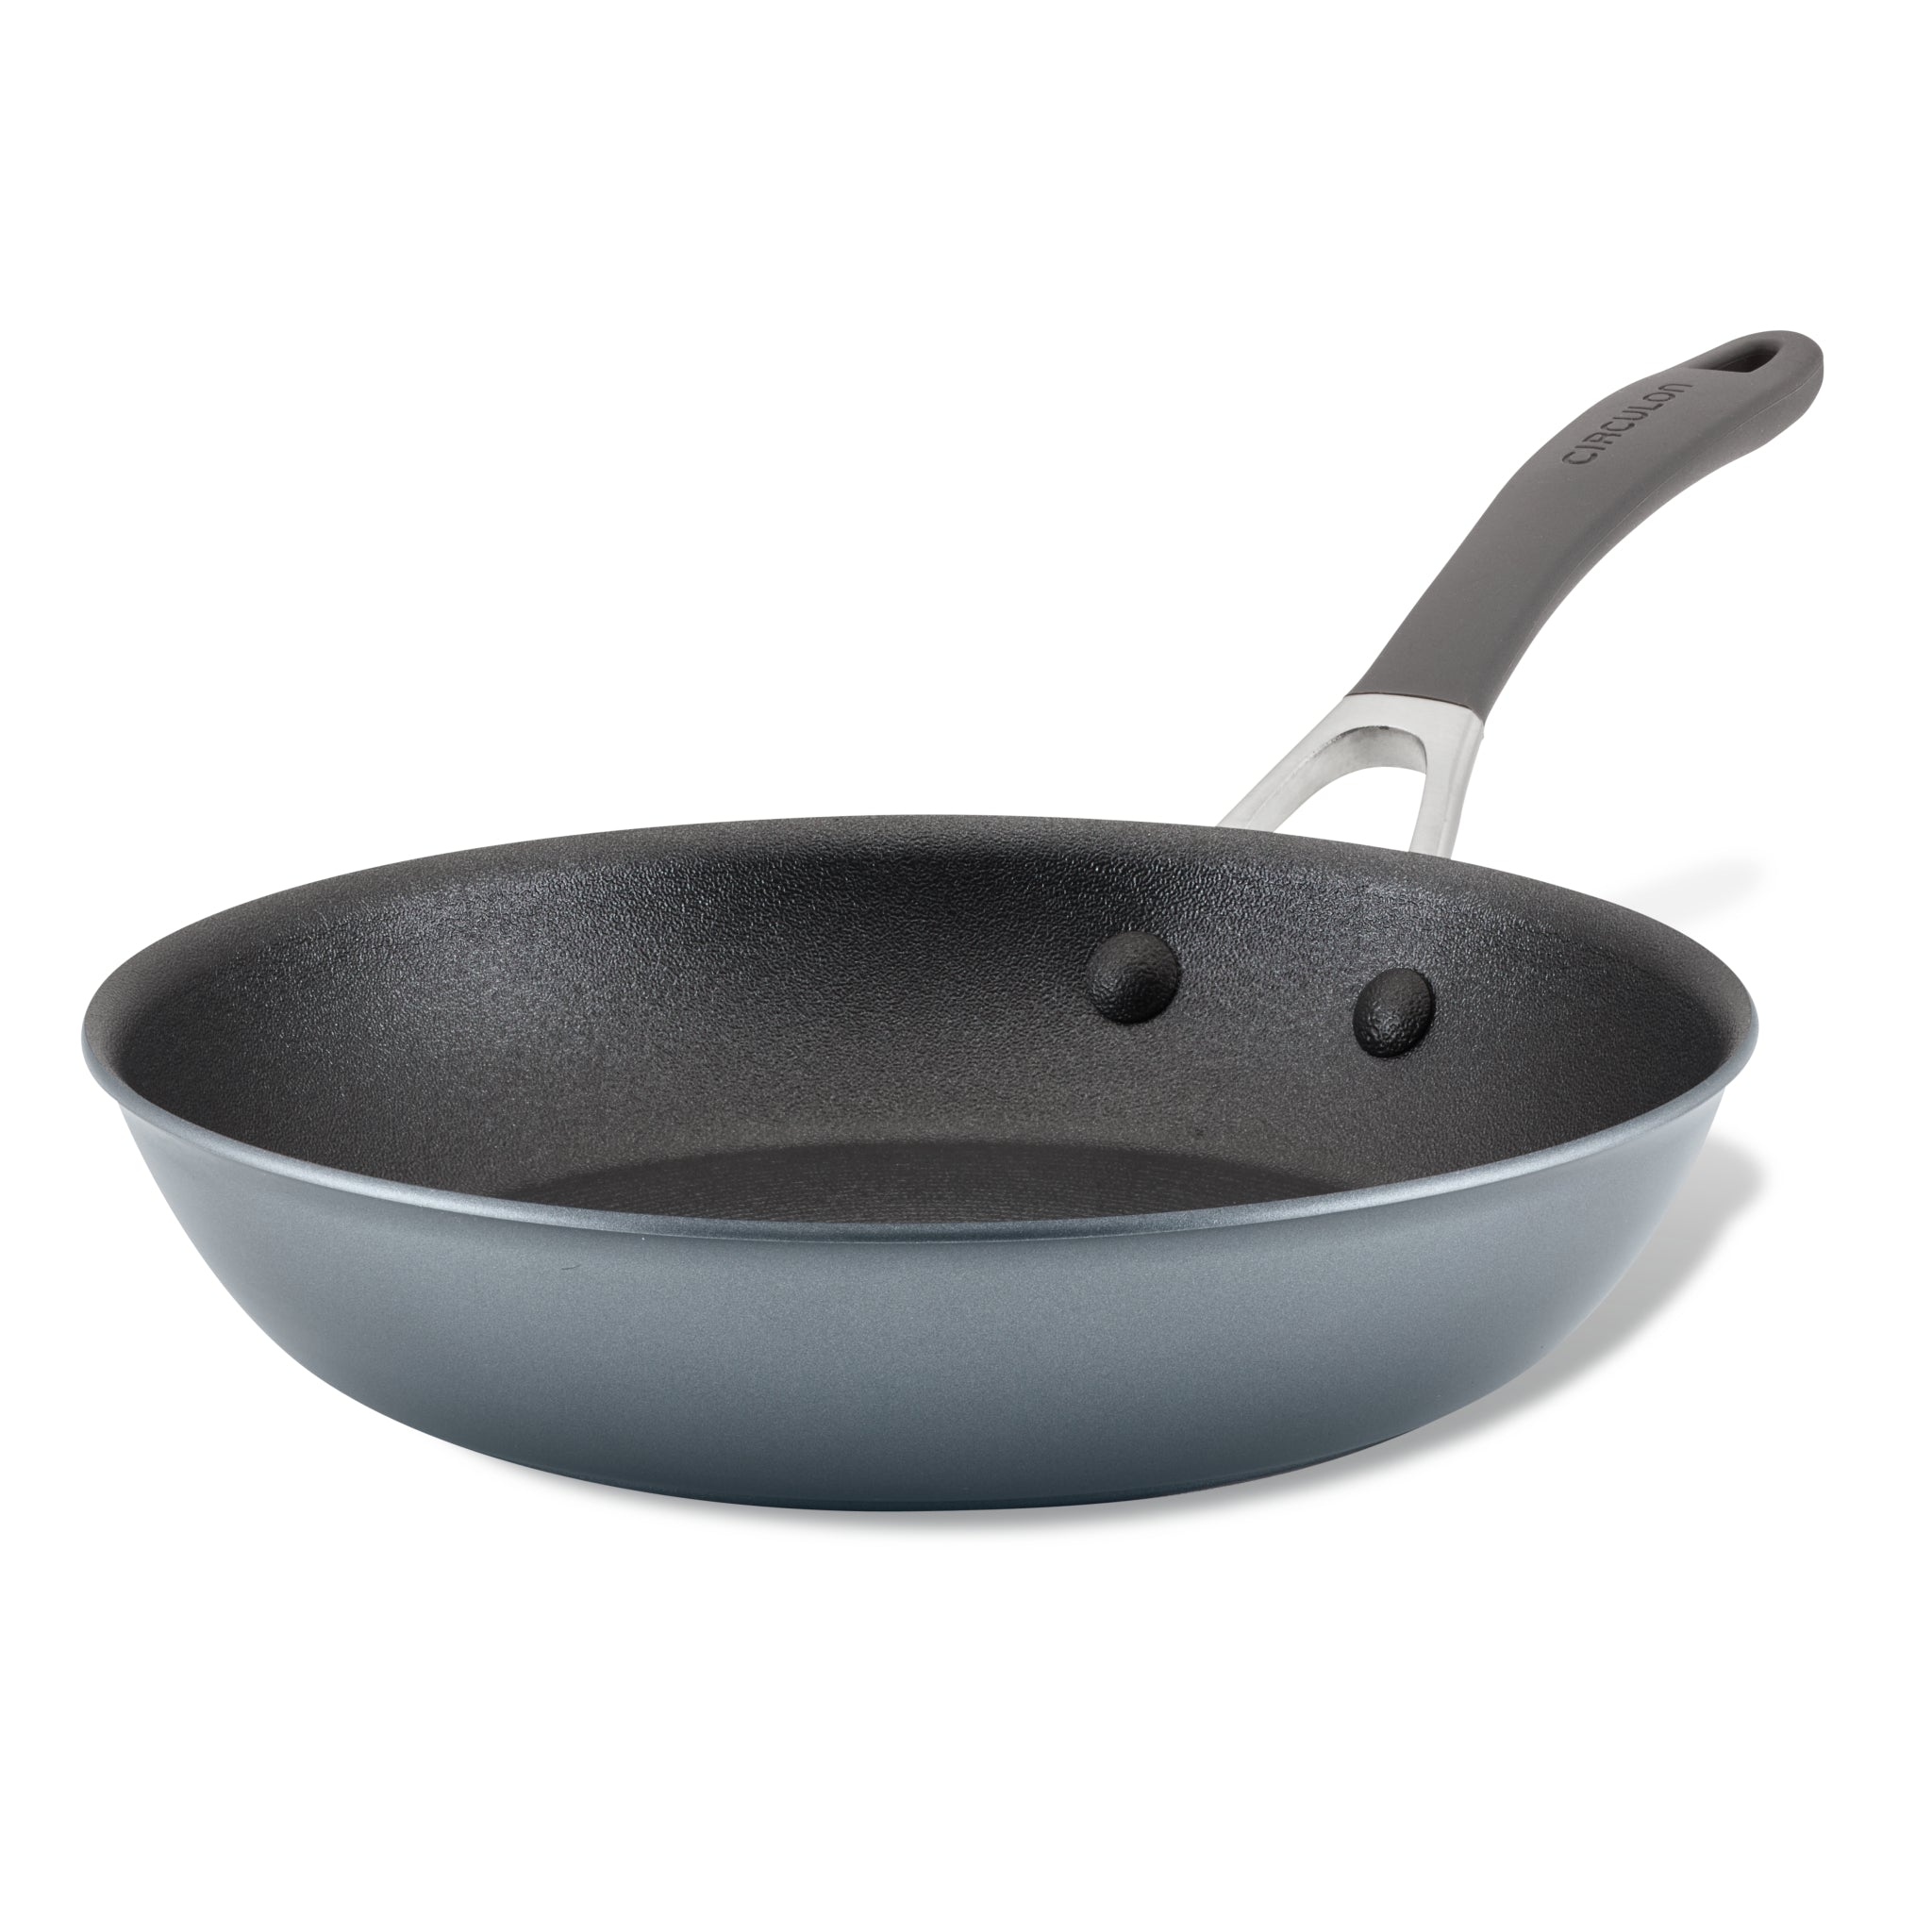 Premier™ Hard-Anodized Nonstick Frying Pan Set, 8-Inch and 10-Inch